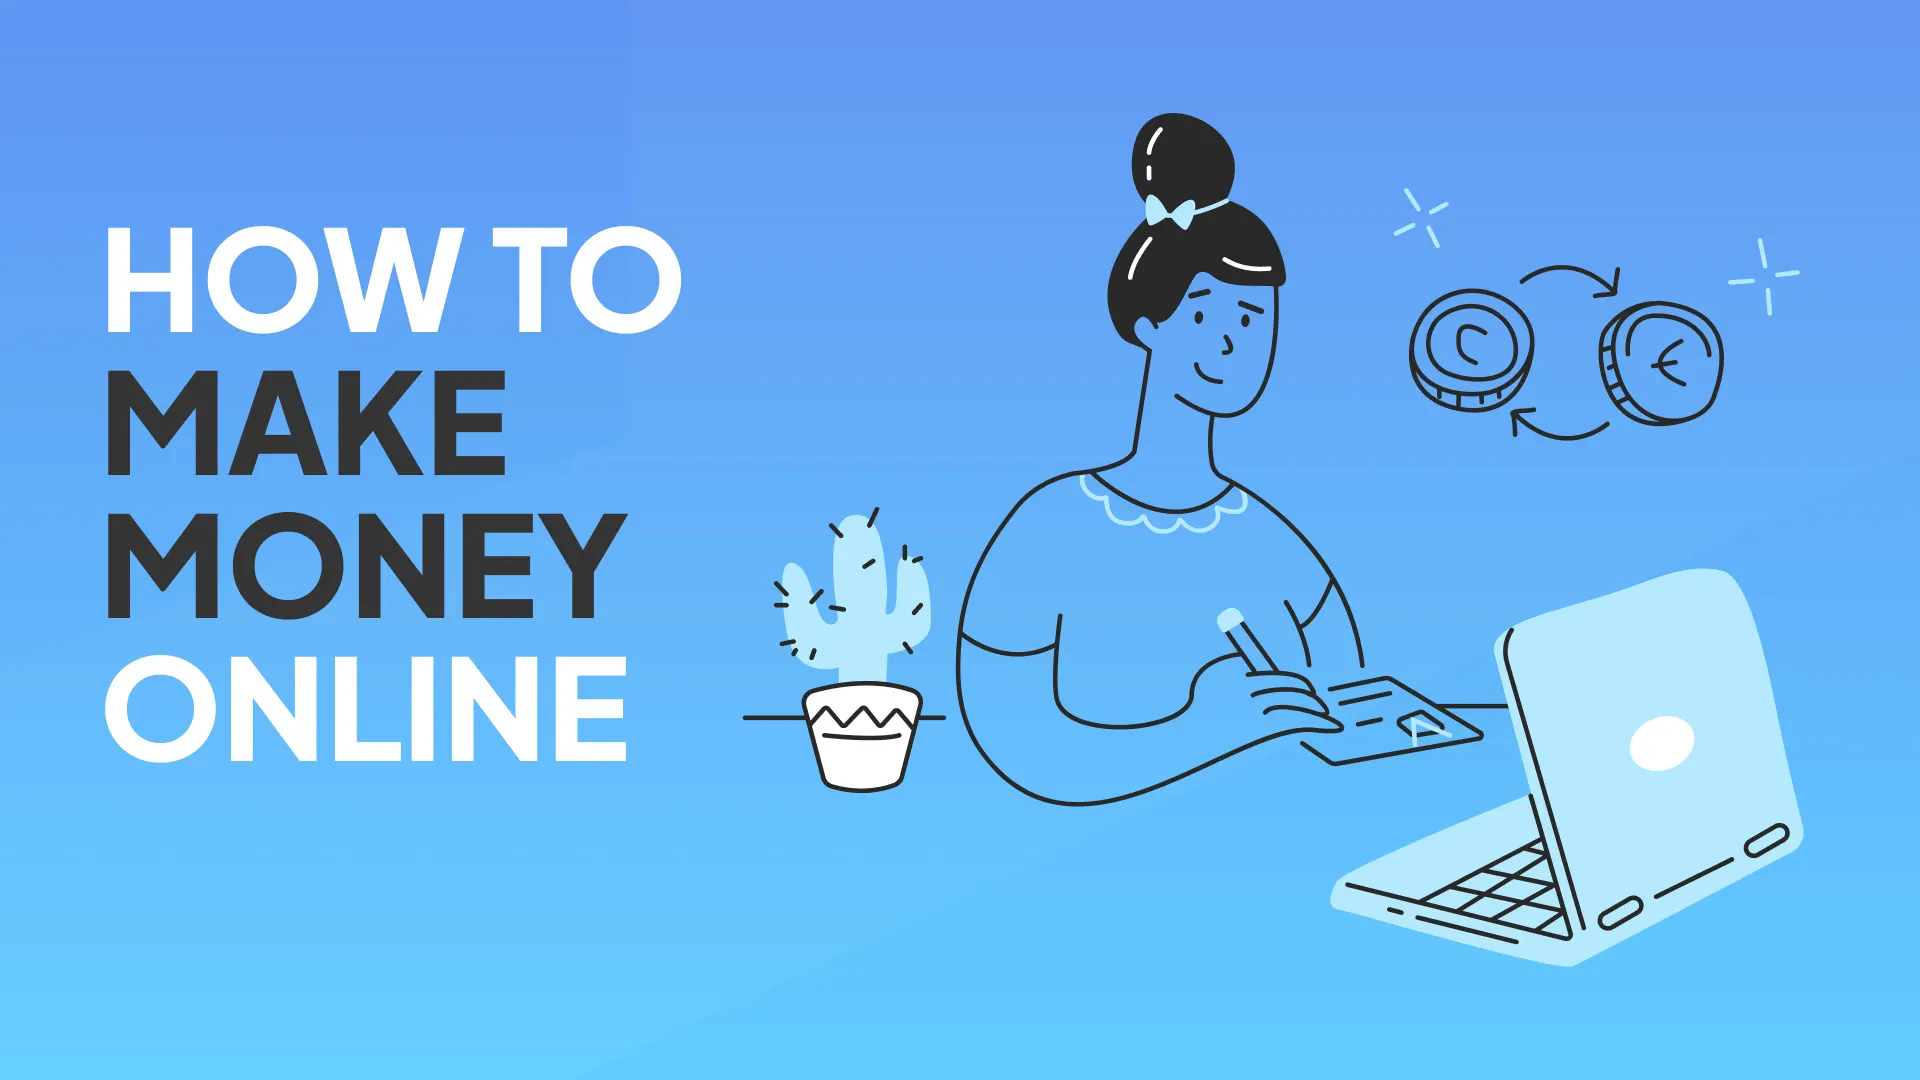 Make Money Online With These 21 Legit Side Gigs Can Be Fun For Everyone